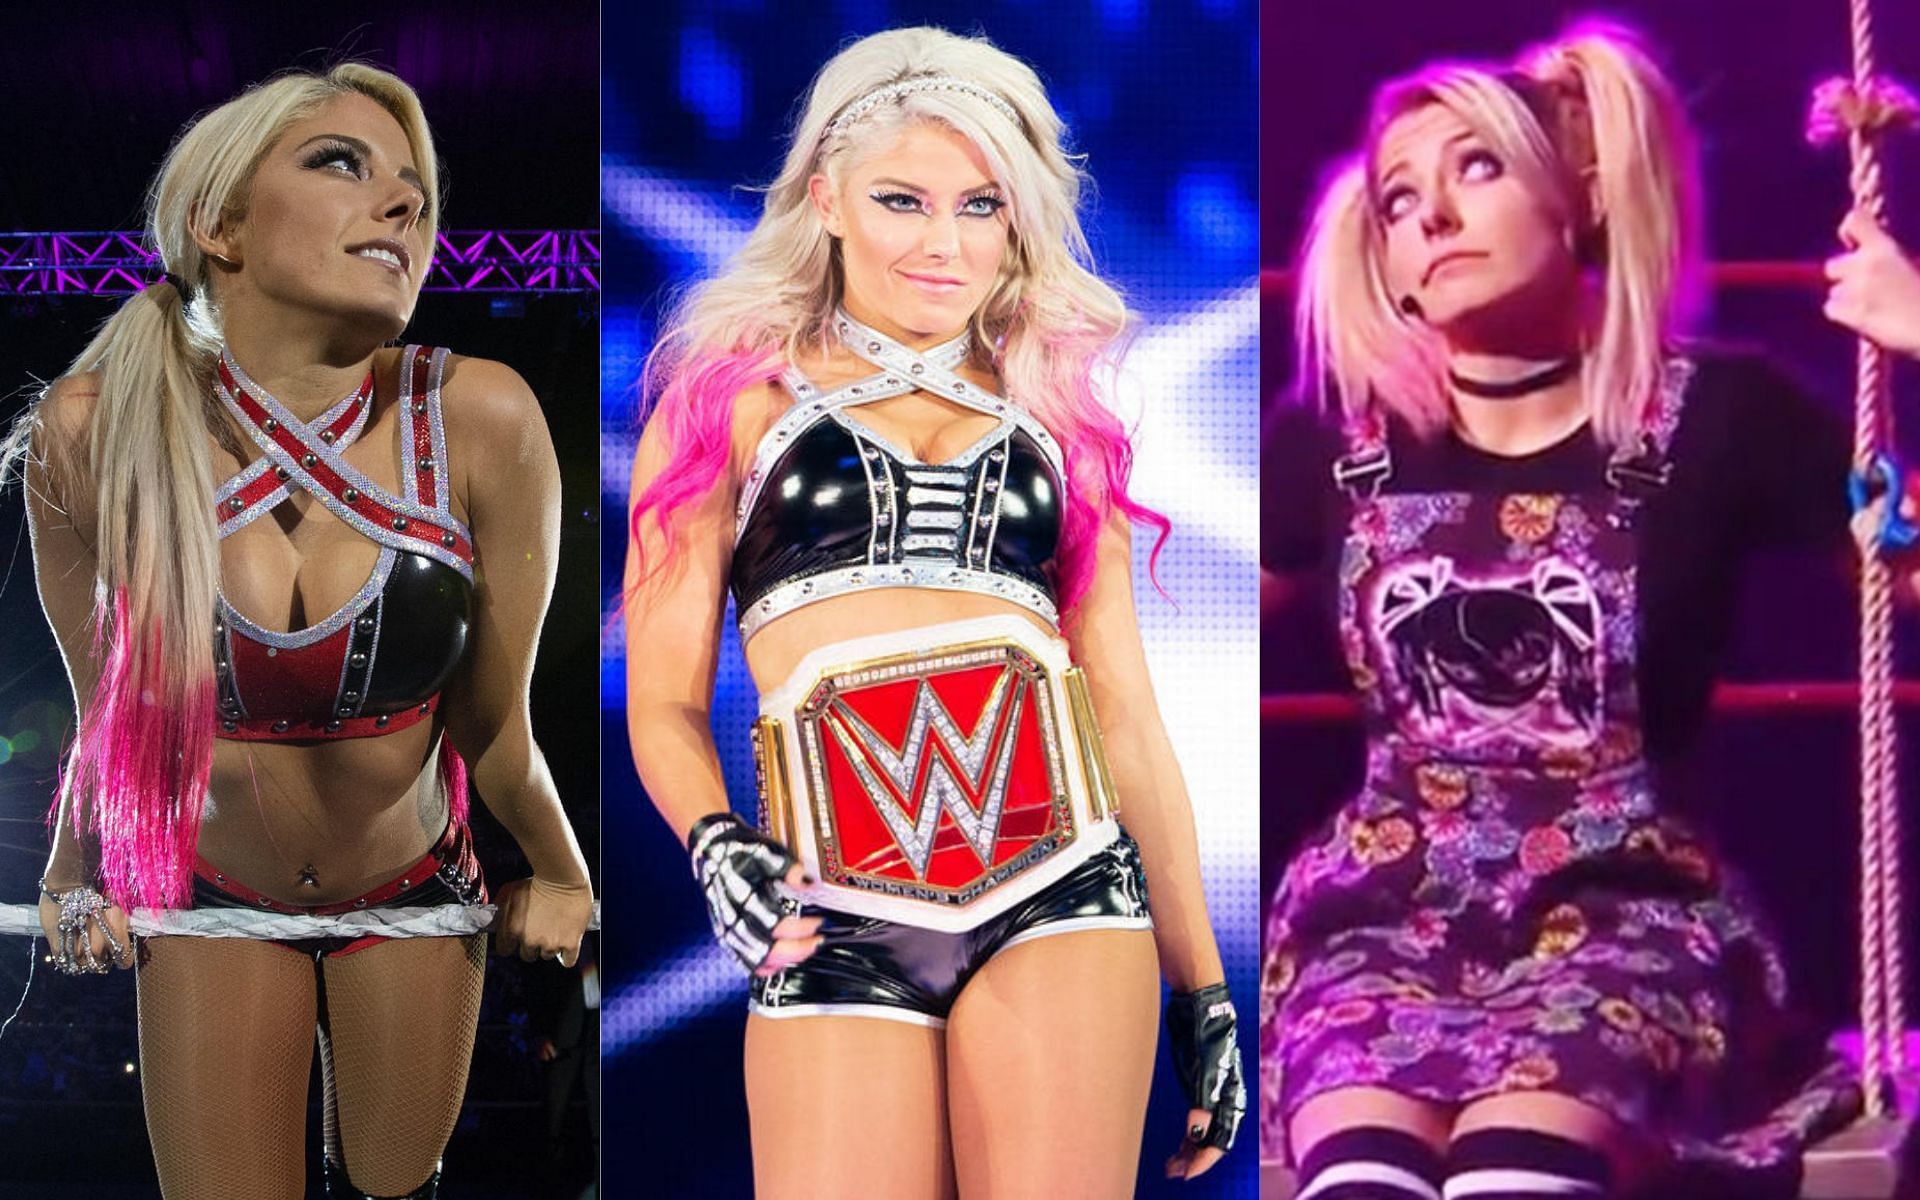 Alexa Bliss has been in multiple roles throughout her WWE career